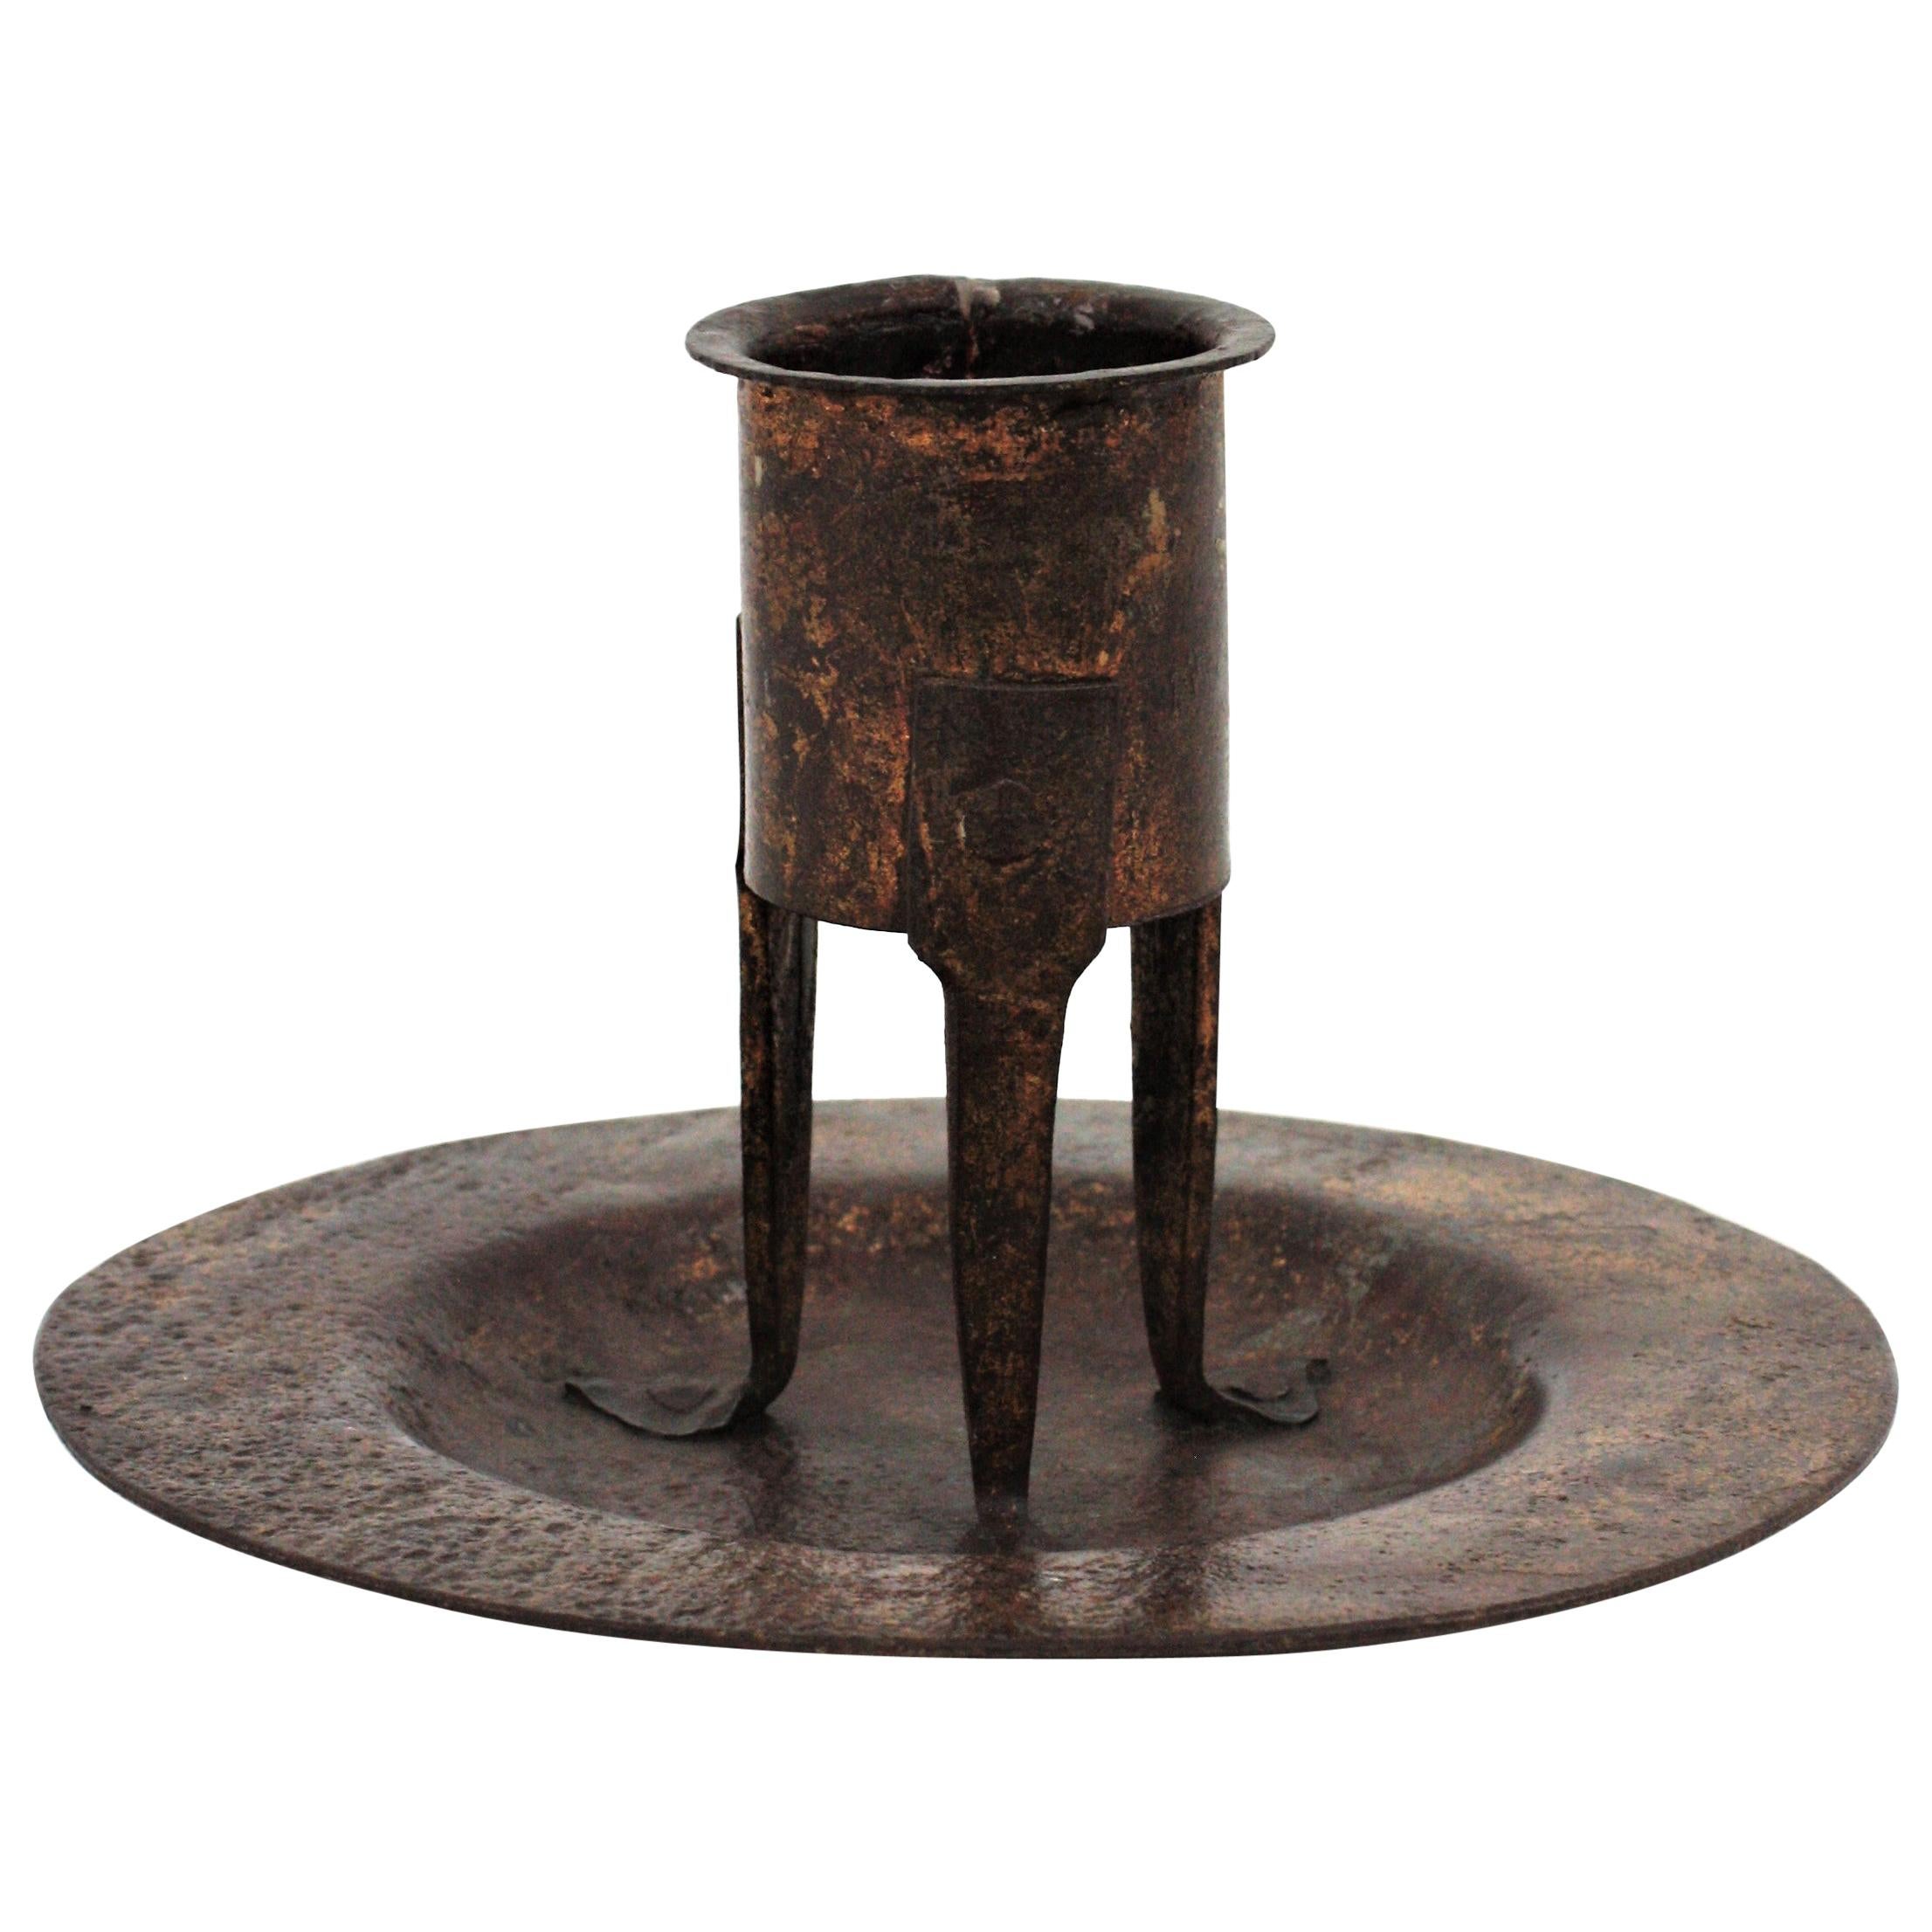 Gorgeous handwrought iron round plate with standing candleholder, Spain, 16th-17th century.
This medieval style candleholder stands up on three legs on a round plate. It has a terrific aged patina retaining rests of its antique gold leaf